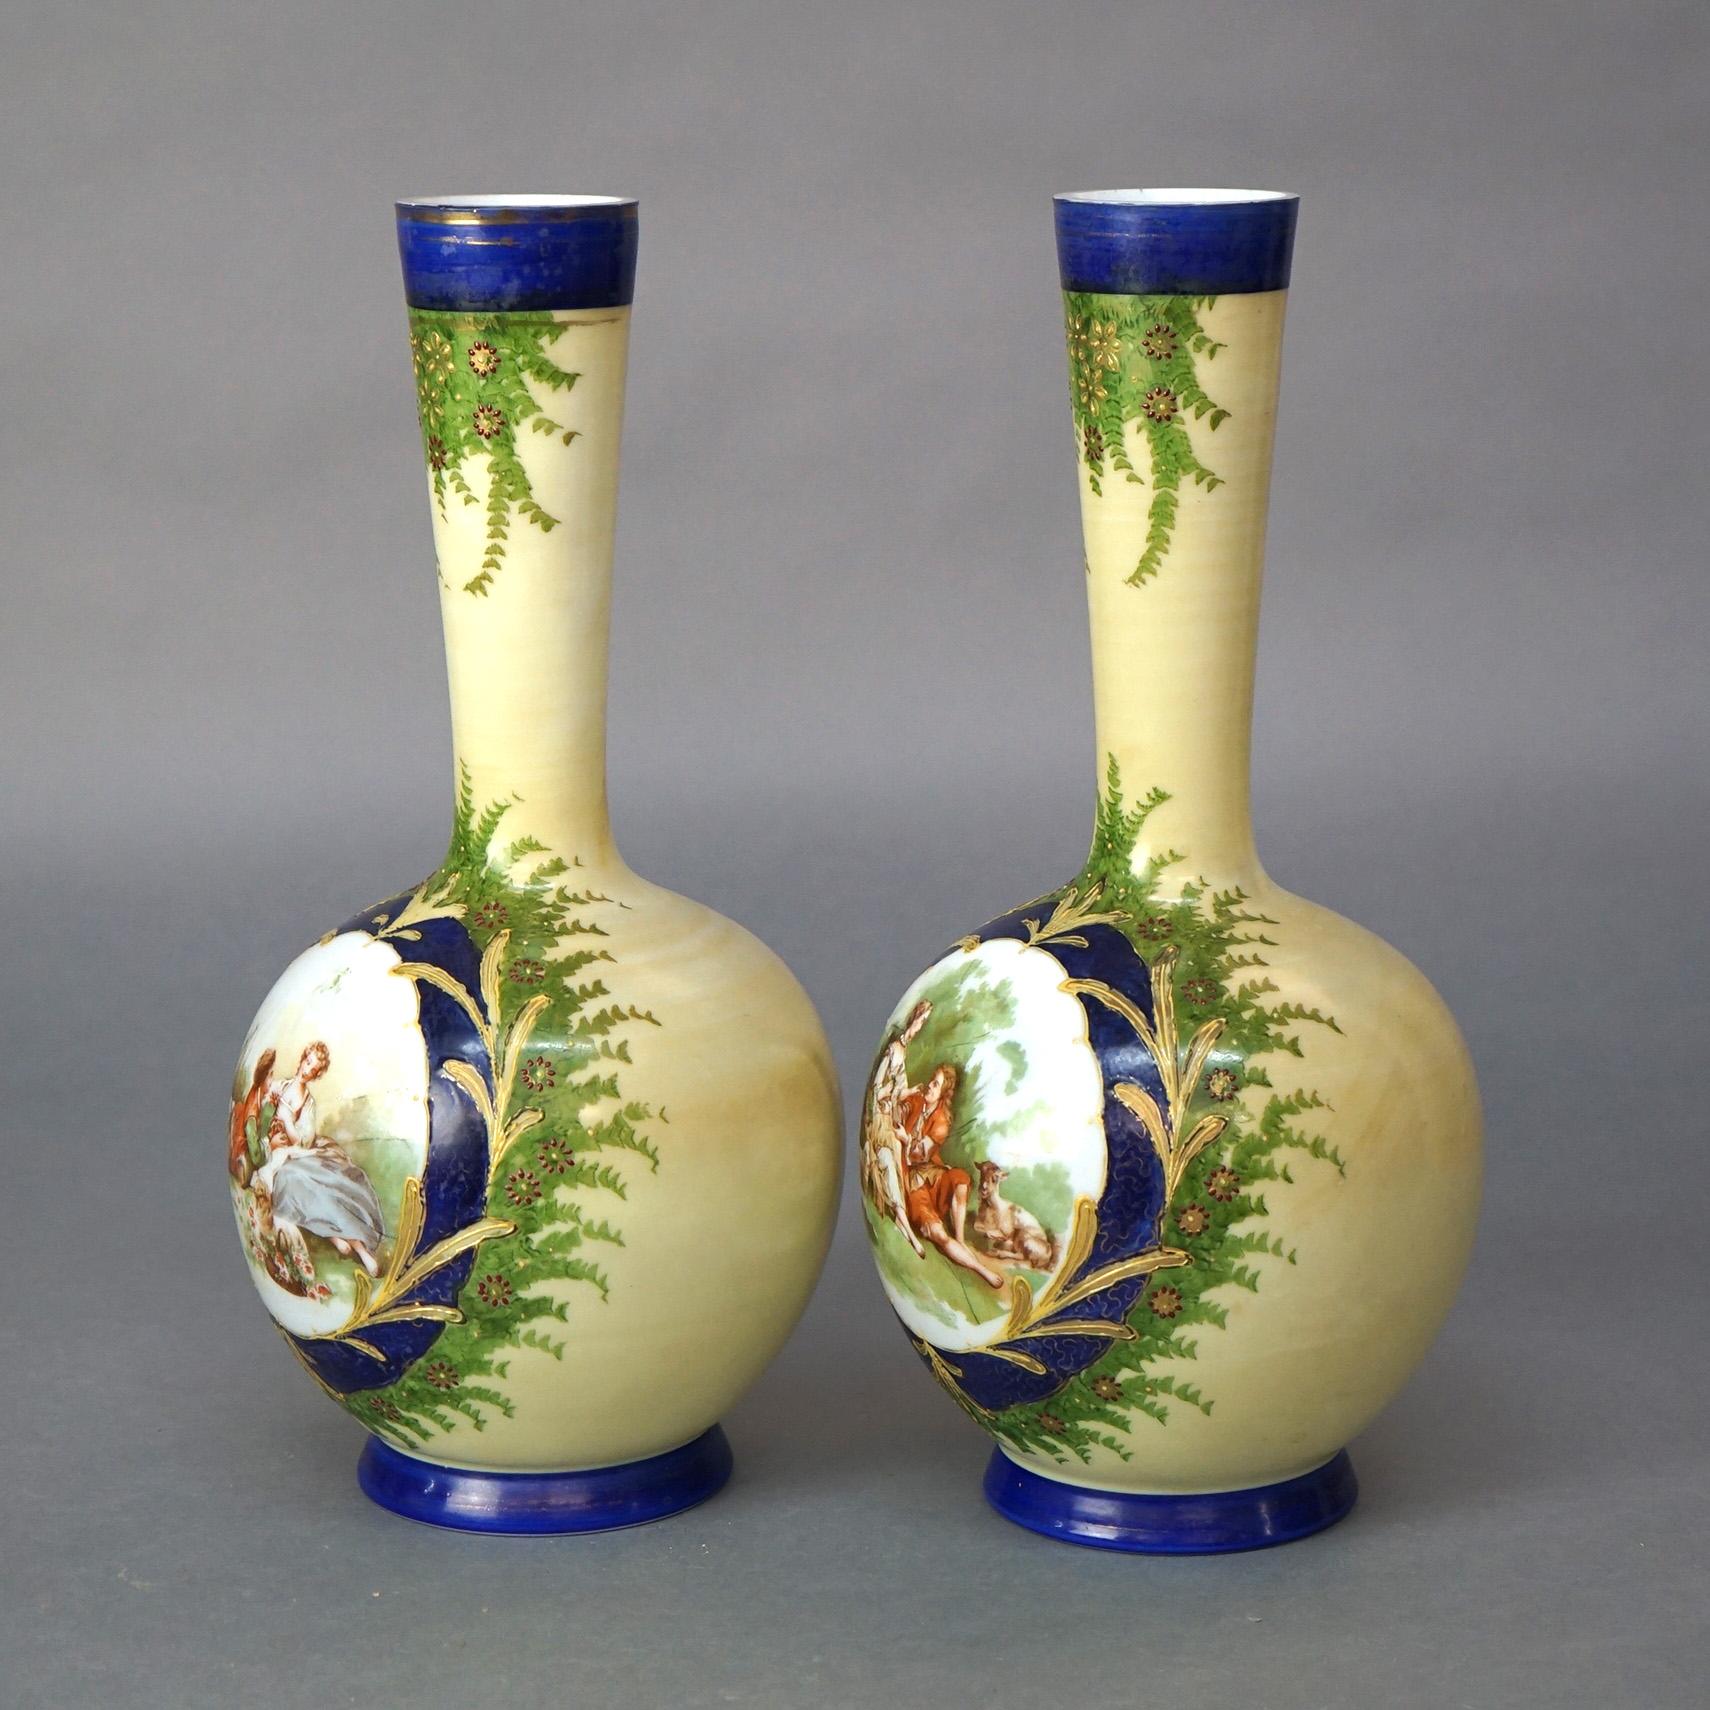 Antique Pair of Hand Painted Opaline Glass Vases with Courting Scenes C1890

Measures- 15''H x 7''W x 7''D